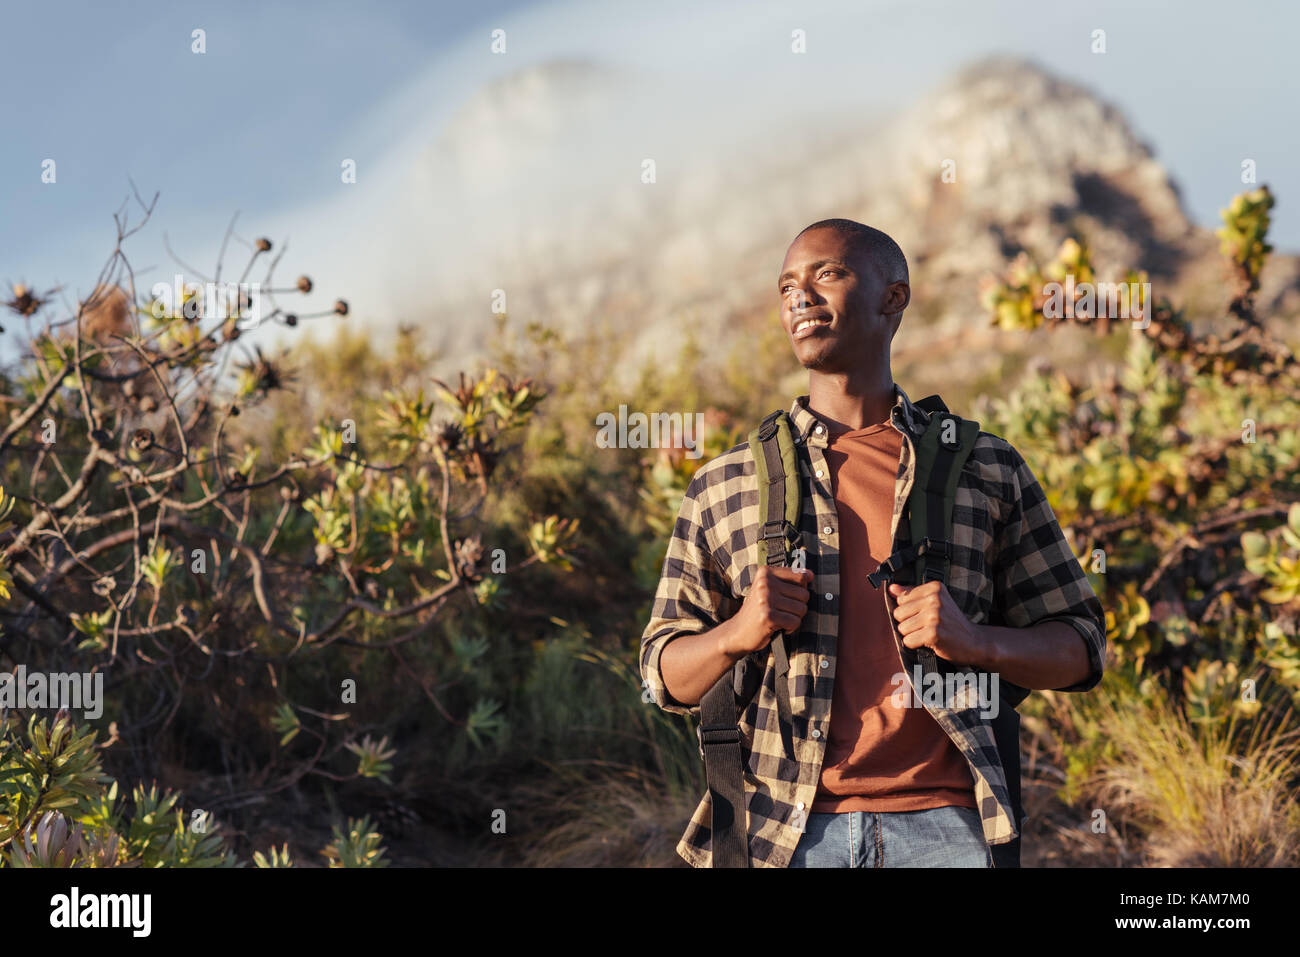 Smiling young African man out for a mountain hike Stock Photo